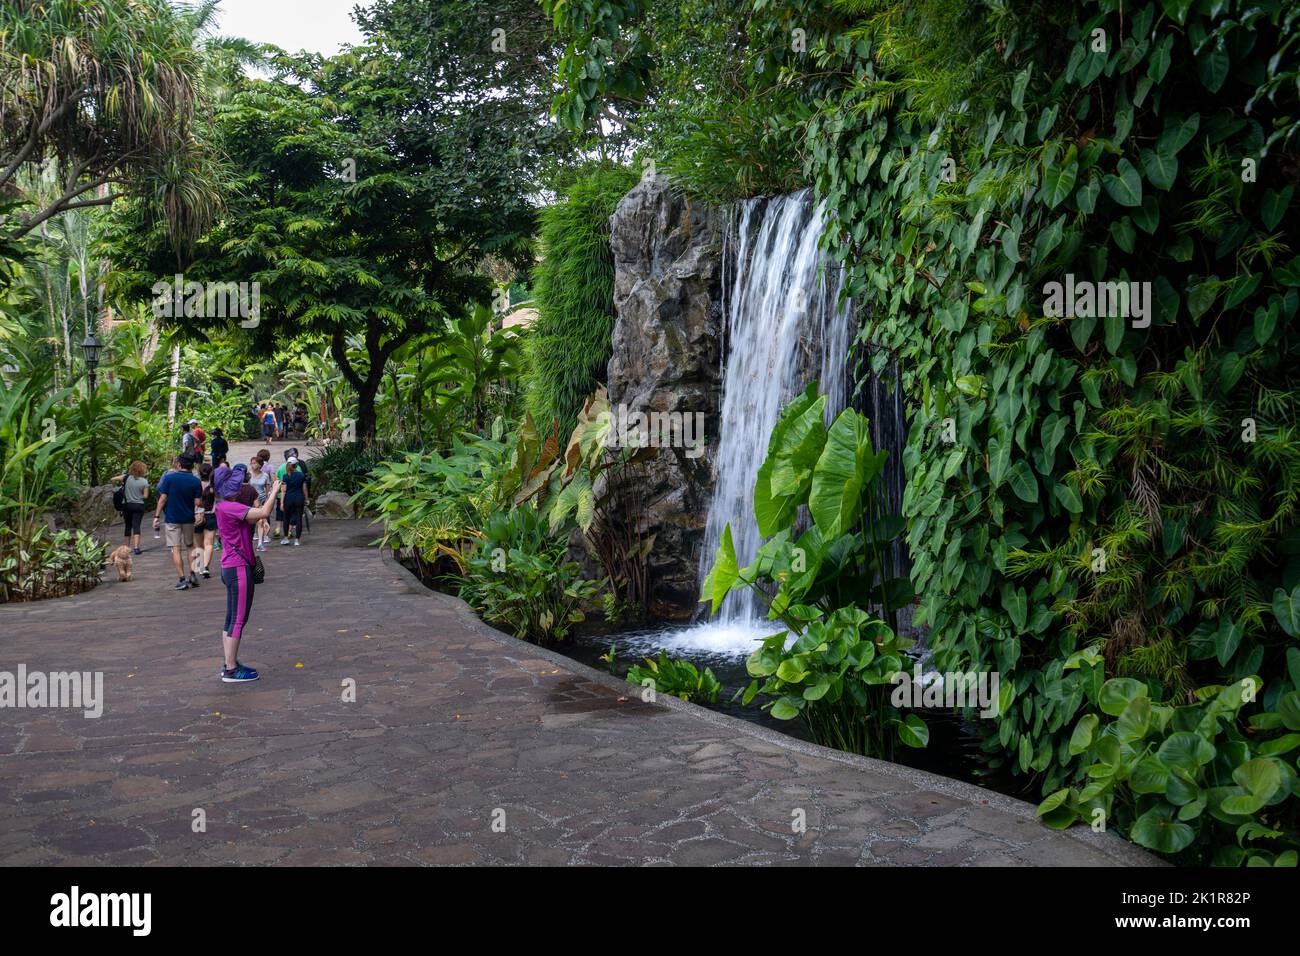 Visitor photographing waterfall in Singapore Botanic Gardens established in 1859 and covering 82 hectares. Stock Photo